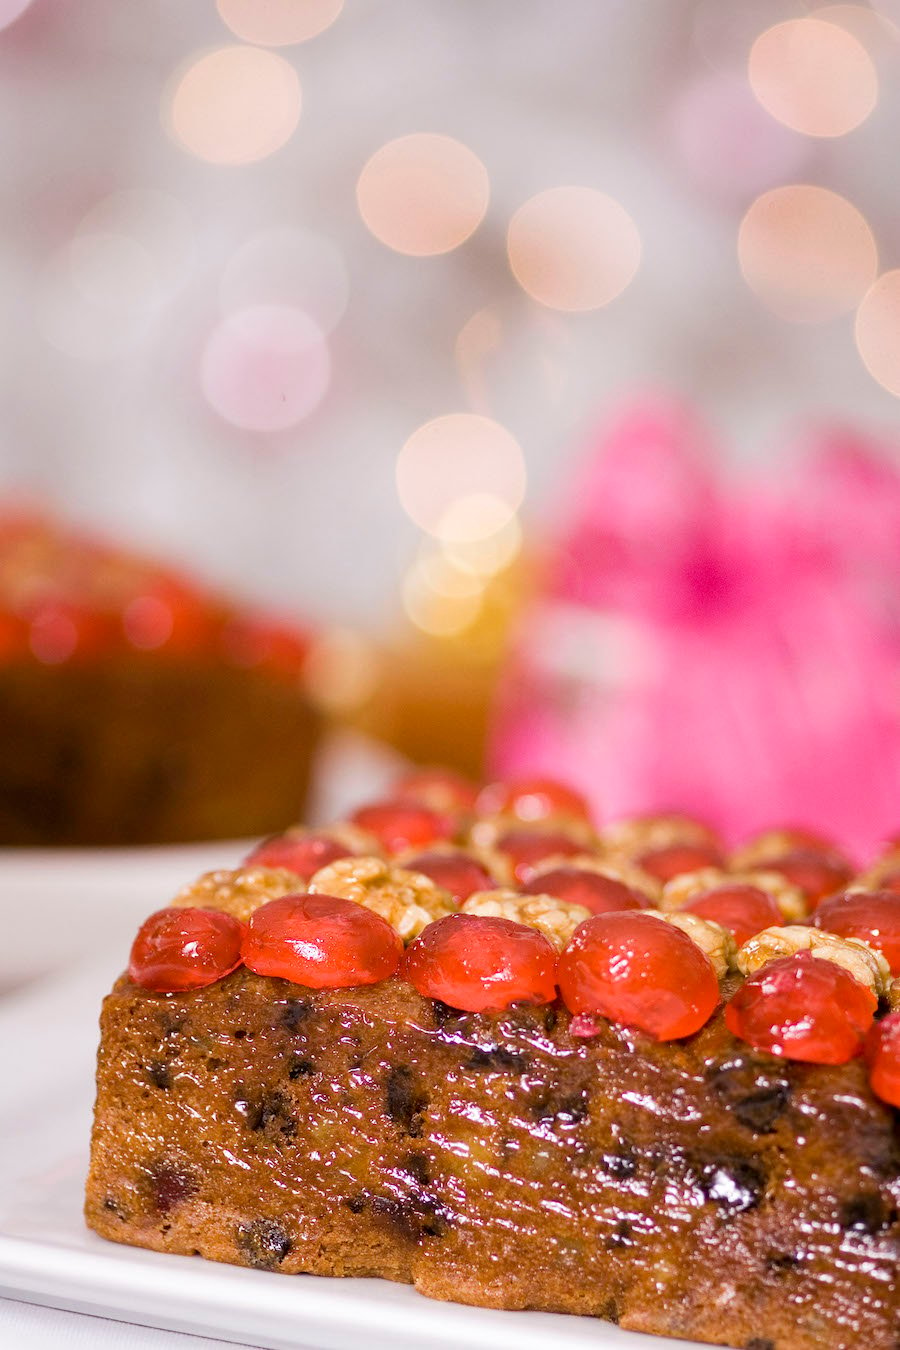 A square Christmas cake with festive lights in the background